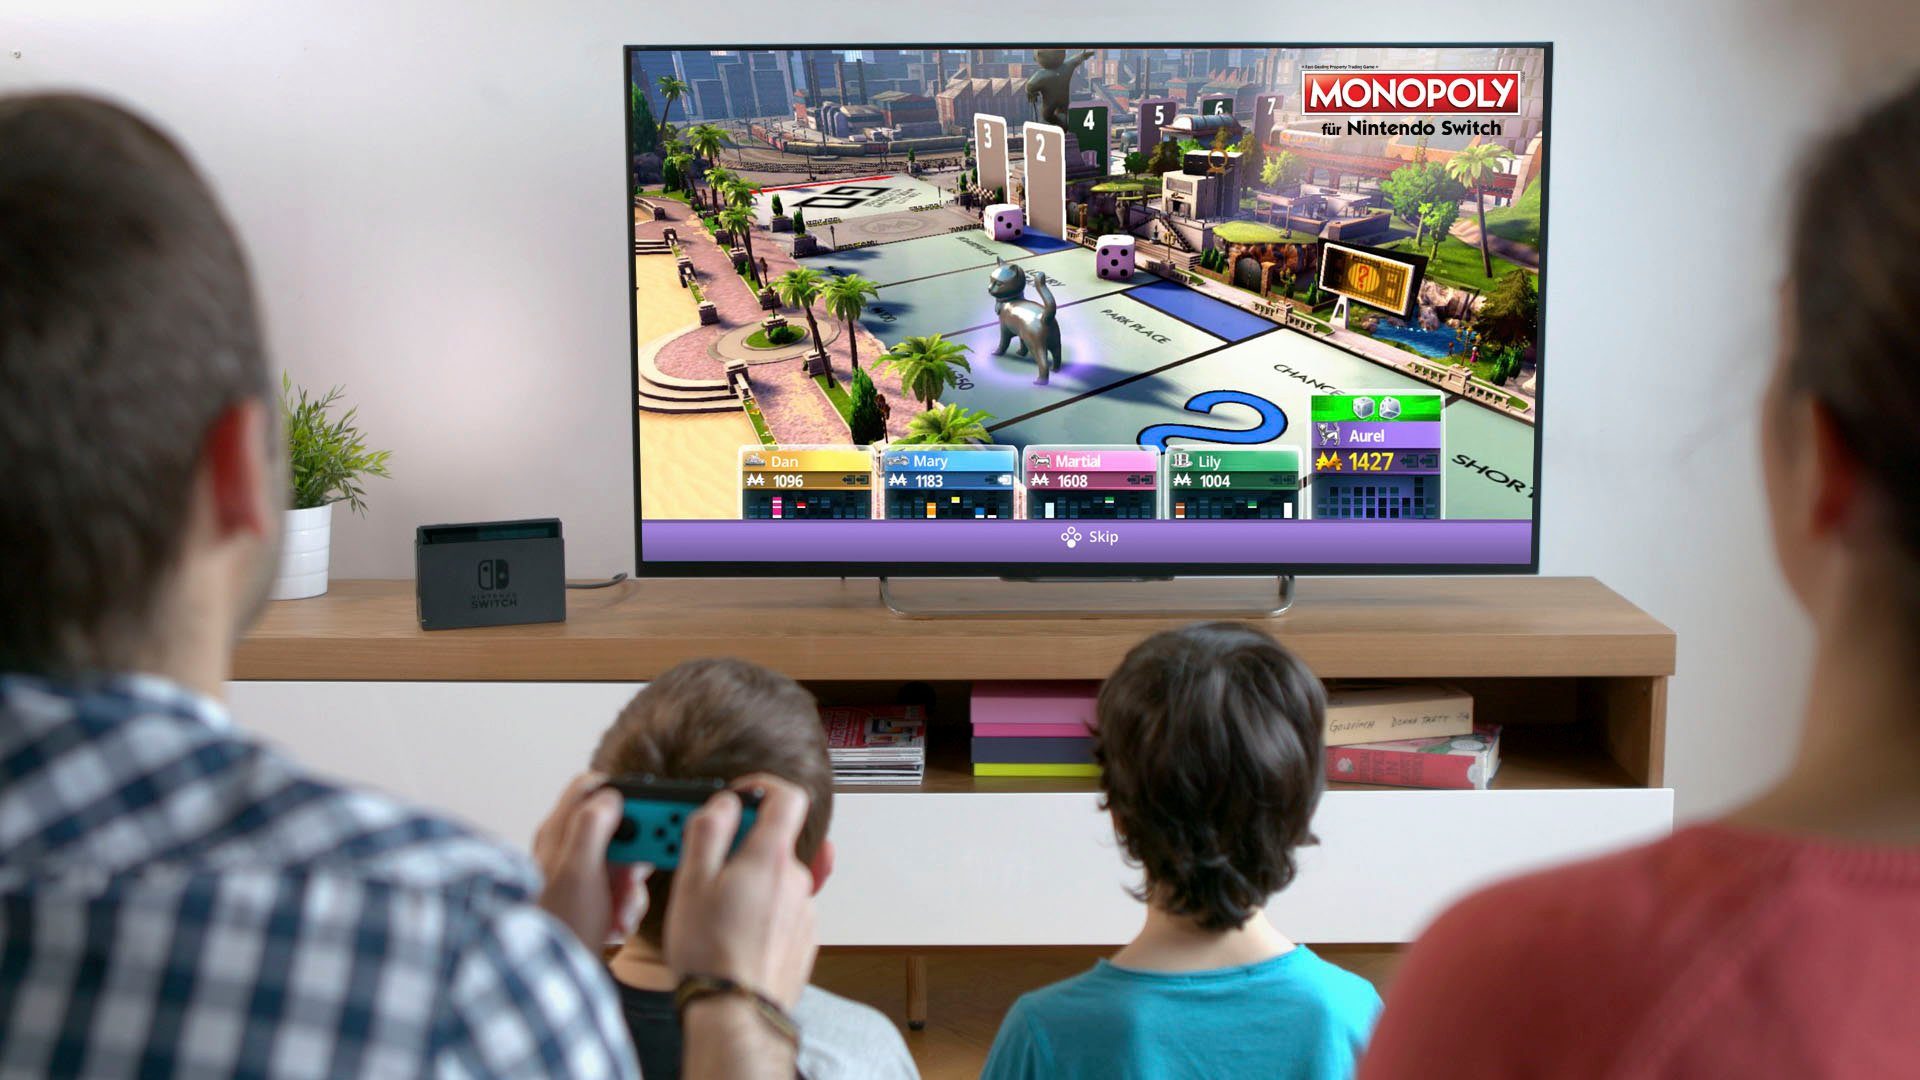 UBISOFT MONOPOLY THE Switch IN Nintendo BOX) (CODE